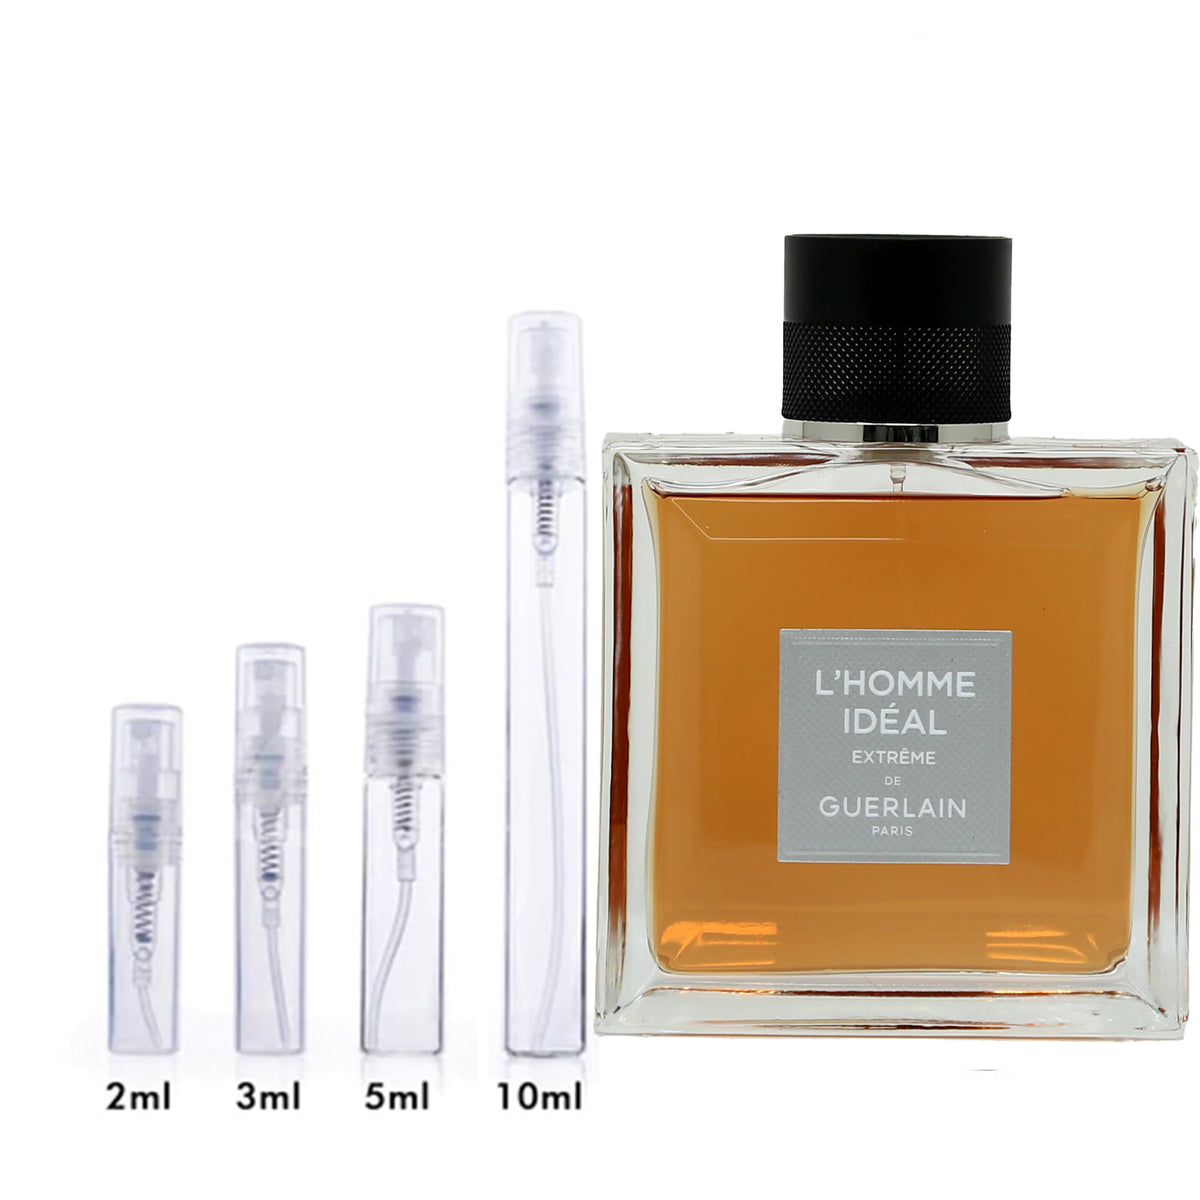 Lhomme Ideal Extreme by Guerlain Fragrance Samples, DecantX